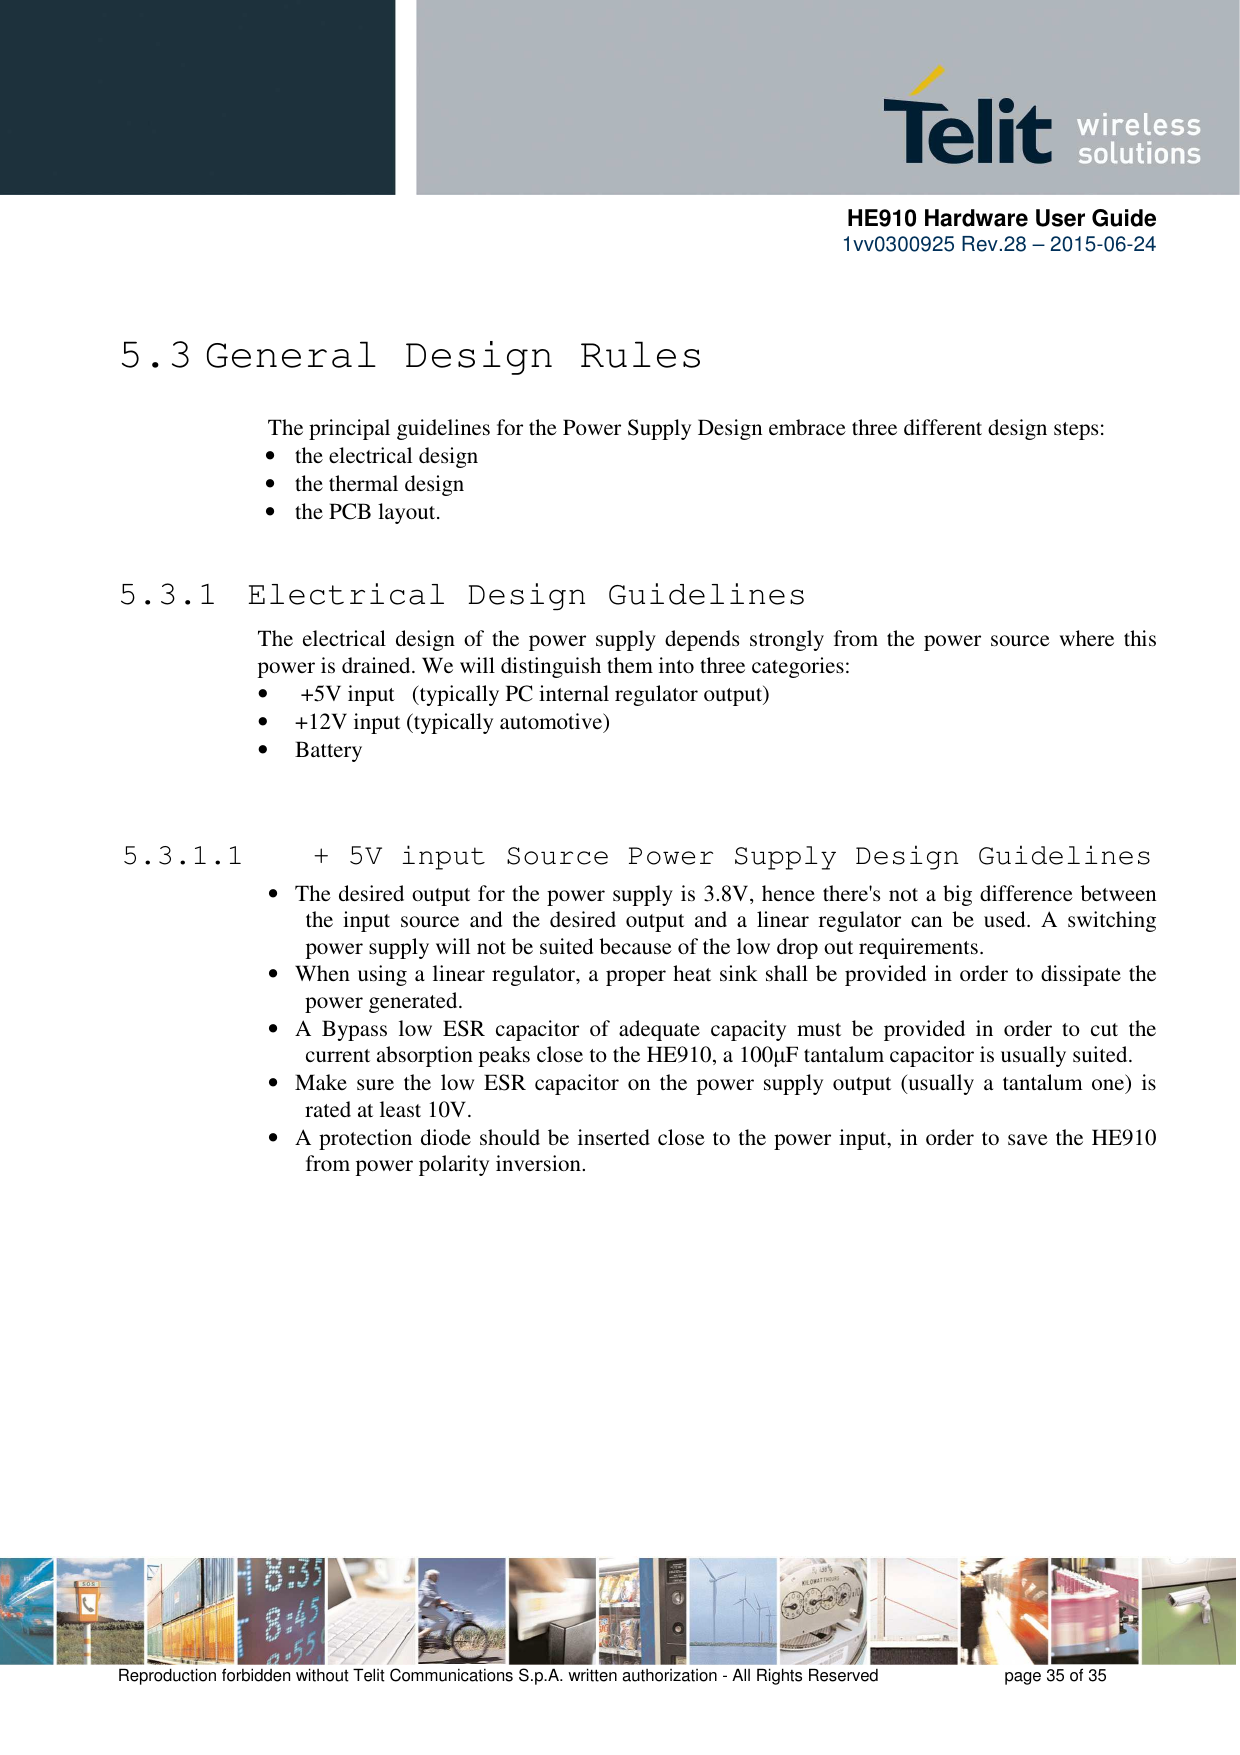      HE910 Hardware User Guide 1vv0300925 Rev.28 – 2015-06-24    Reproduction forbidden without Telit Communications S.p.A. written authorization - All Rights Reserved    page 35 of 35   5.3 General Design Rules The principal guidelines for the Power Supply Design embrace three different design steps: • the electrical design • the thermal design • the PCB layout.  5.3.1  Electrical Design Guidelines The electrical design of the power supply depends strongly from the power source  where this power is drained. We will distinguish them into three categories: •  +5V input   (typically PC internal regulator output) • +12V input (typically automotive) • Battery   5.3.1.1  + 5V input Source Power Supply Design Guidelines • The desired output for the power supply is 3.8V, hence there&apos;s not a big difference between the  input  source  and  the  desired  output  and  a  linear  regulator  can  be  used.  A  switching power supply will not be suited because of the low drop out requirements. • When using a linear regulator, a proper heat sink shall be provided in order to dissipate the power generated. • A  Bypass  low  ESR  capacitor  of  adequate  capacity  must  be  provided  in  order  to  cut  the current absorption peaks close to the HE910, a 100µF tantalum capacitor is usually suited. • Make sure the low ESR capacitor on the power supply output (usually a tantalum  one) is rated at least 10V. • A protection diode should be inserted close to the power input, in order to save the HE910 from power polarity inversion. 